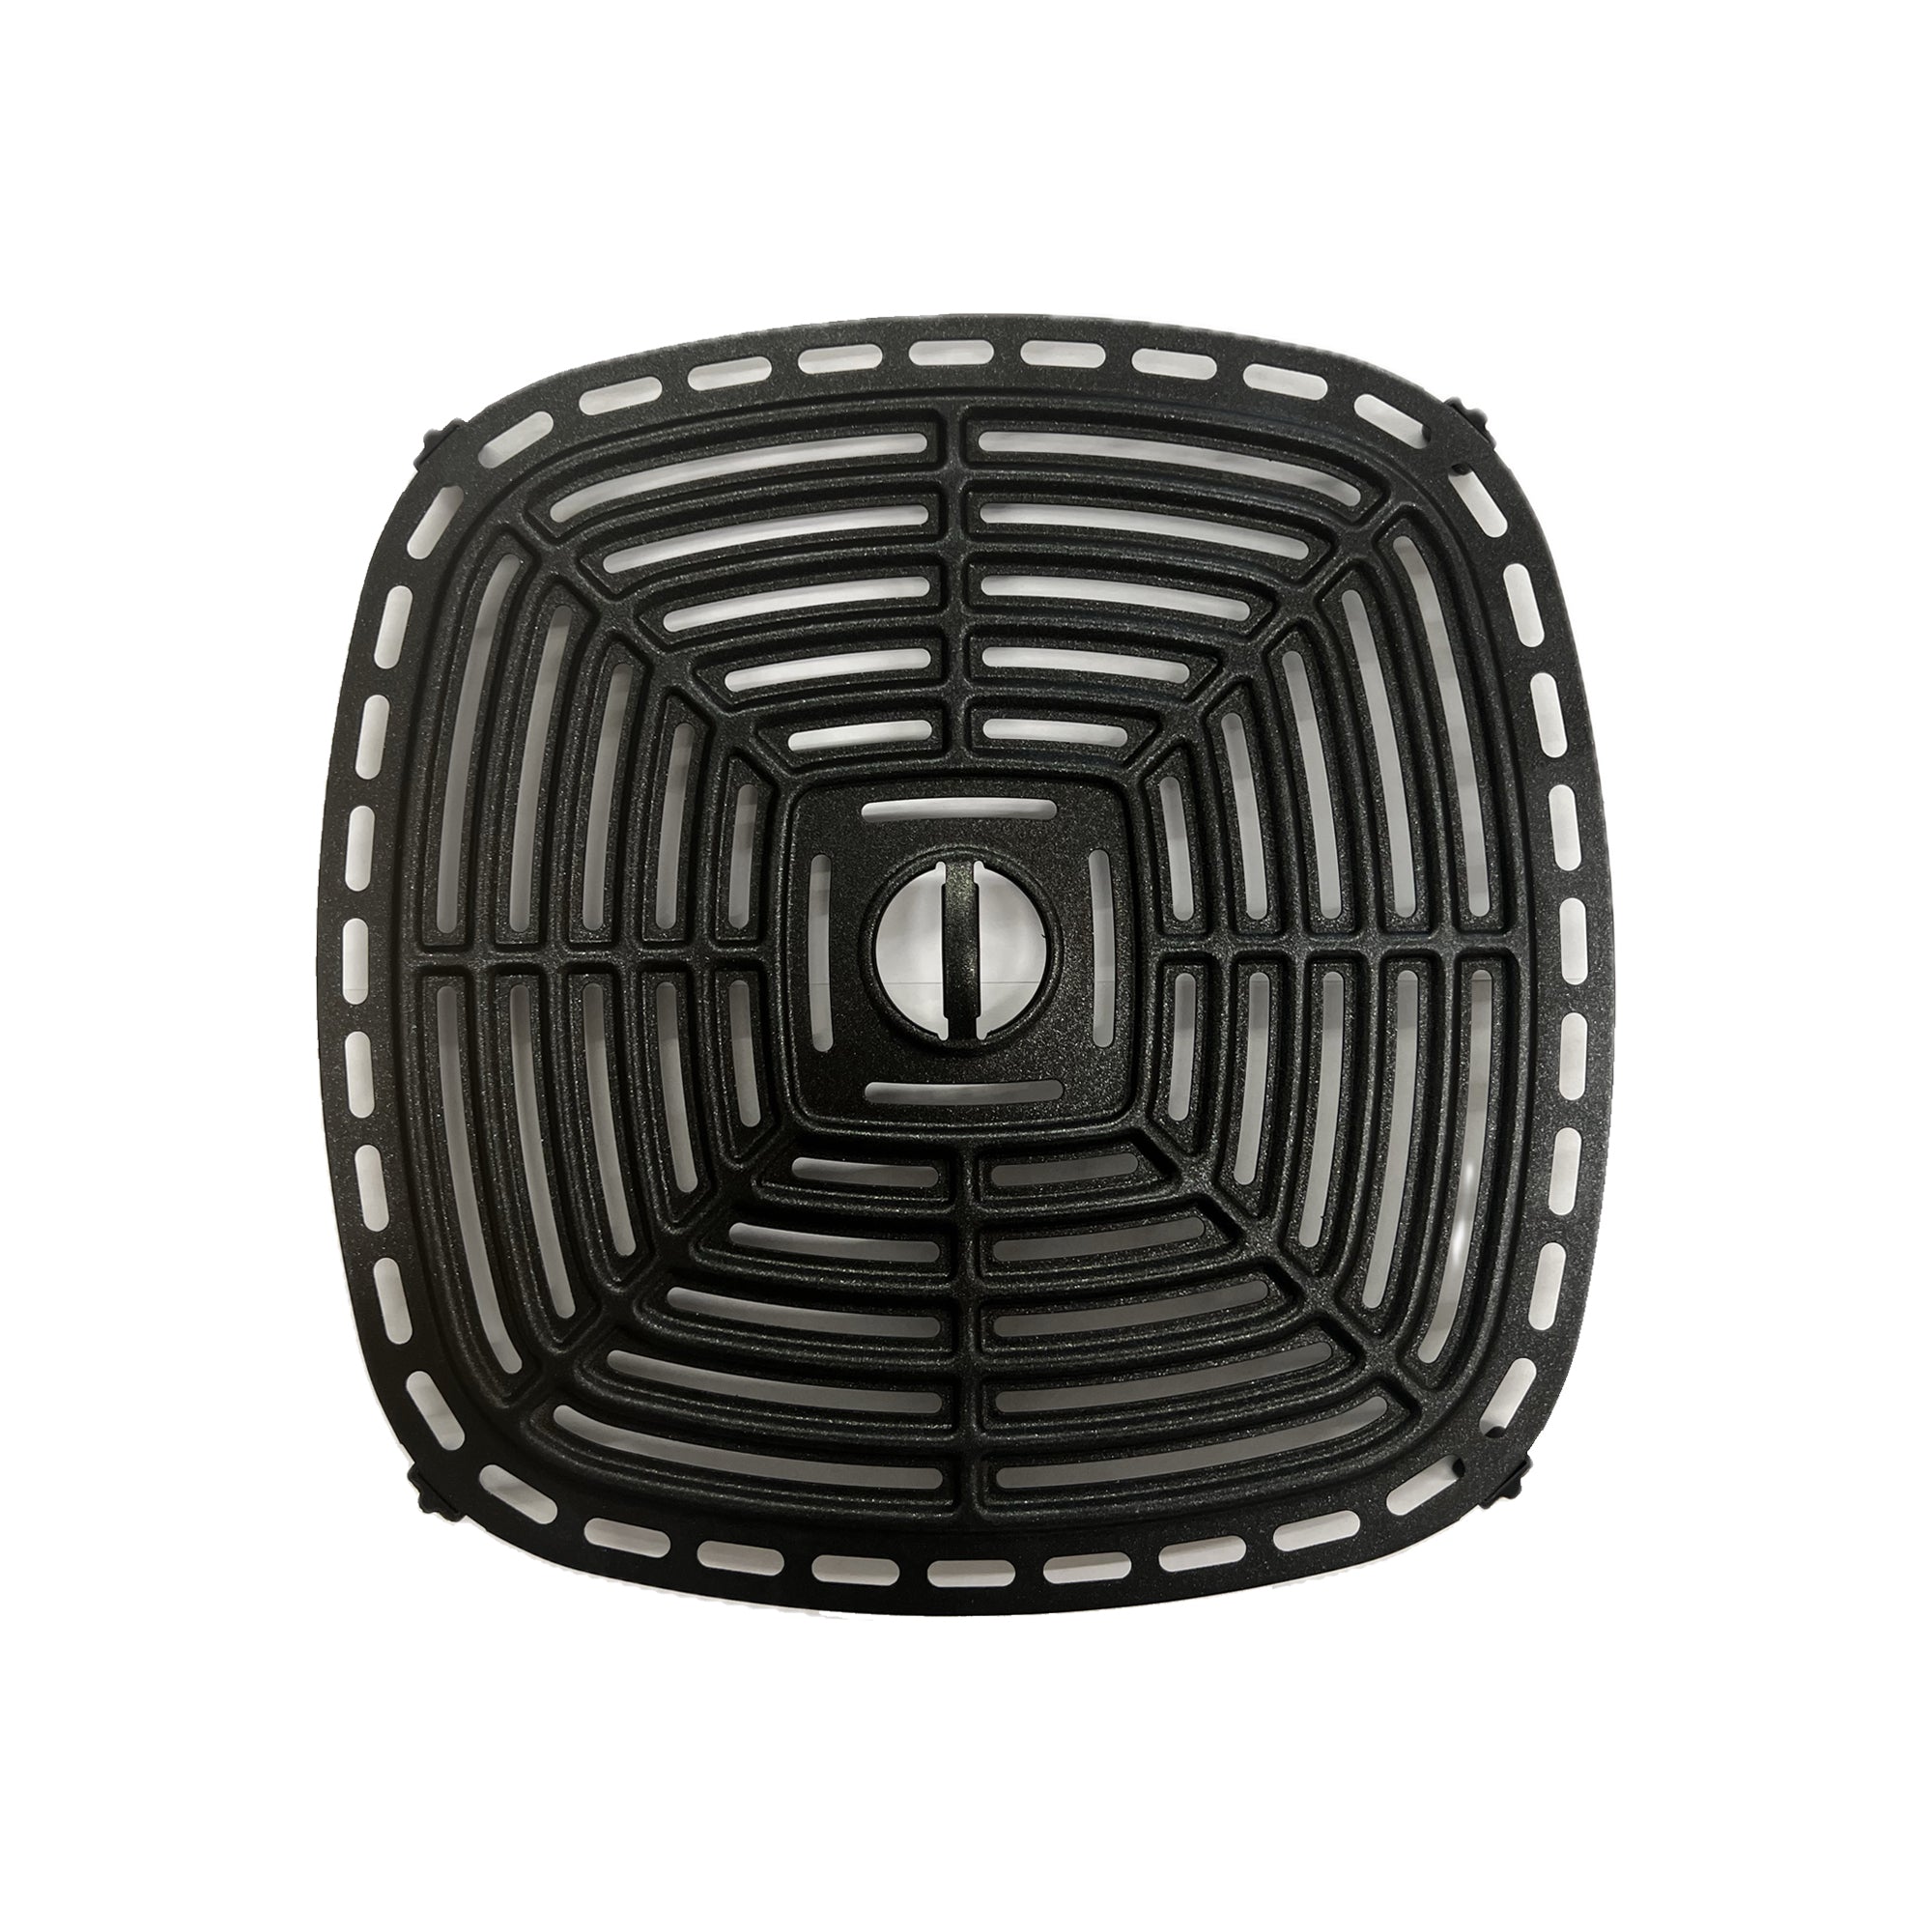 Replacement Metal Tray For NETTA Air Fryers